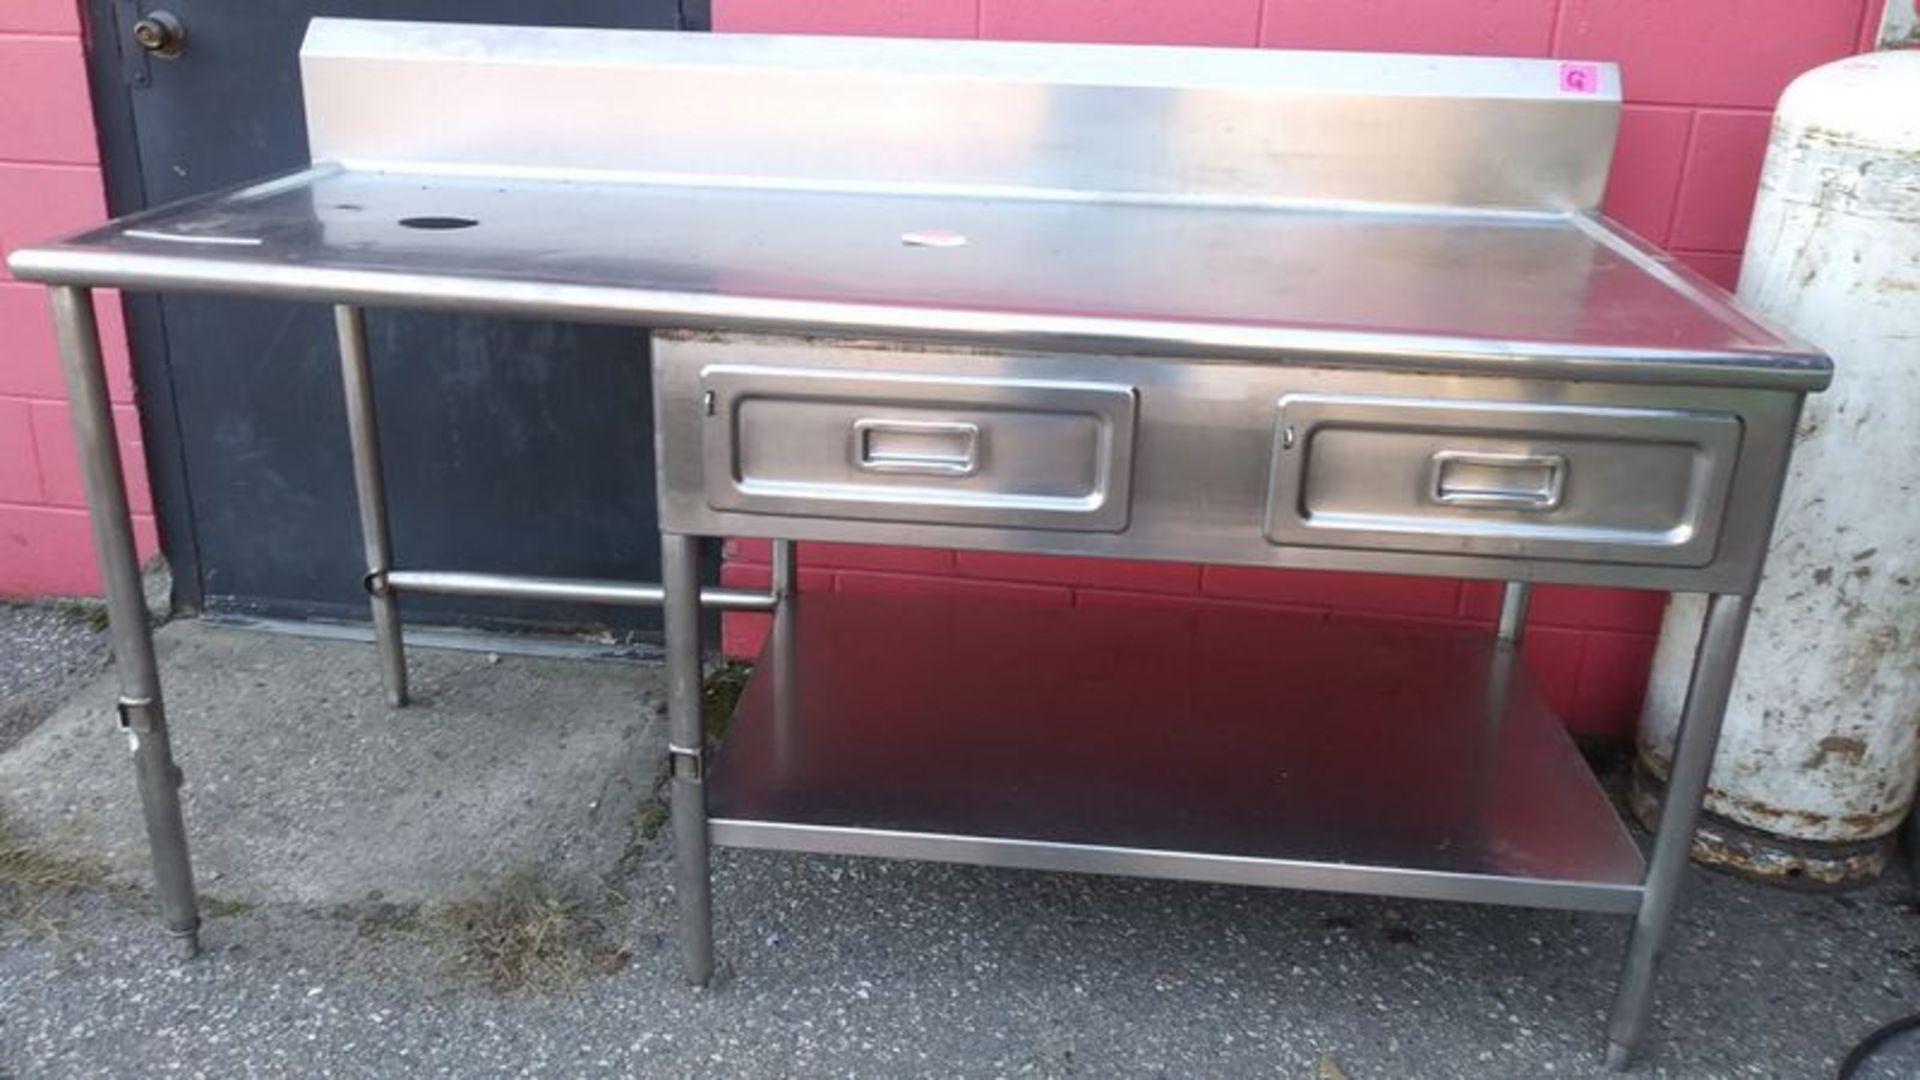 Approx. 6 ft Stainless Steel Table with Spray Attachment and 2 Drawers